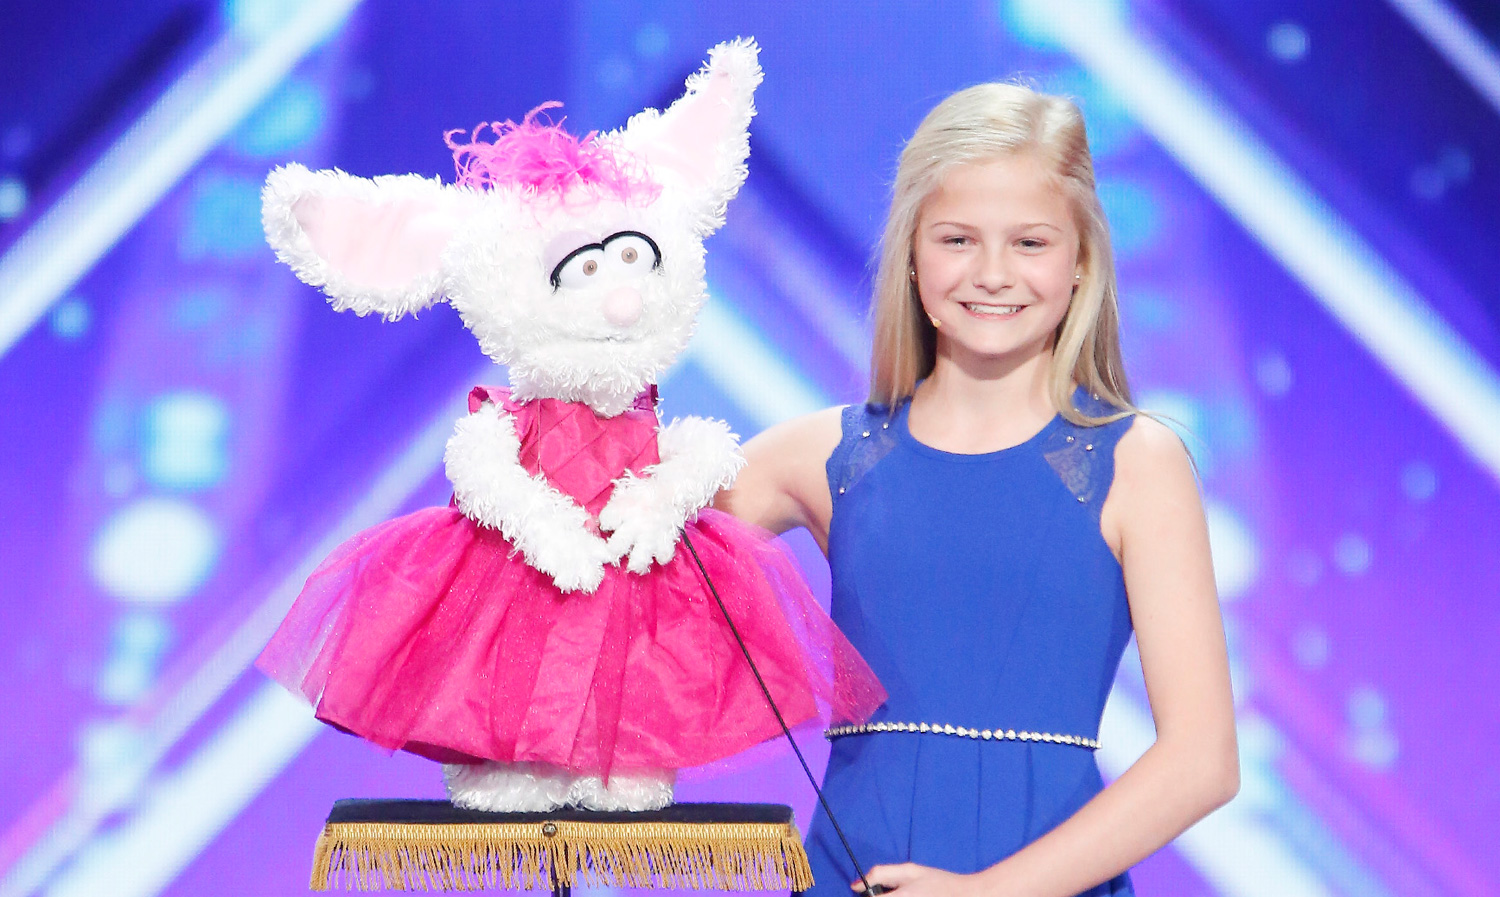 AGT Ventriloquist Darci Lynne Farmer’s Videos Are The Best Thing You’ll